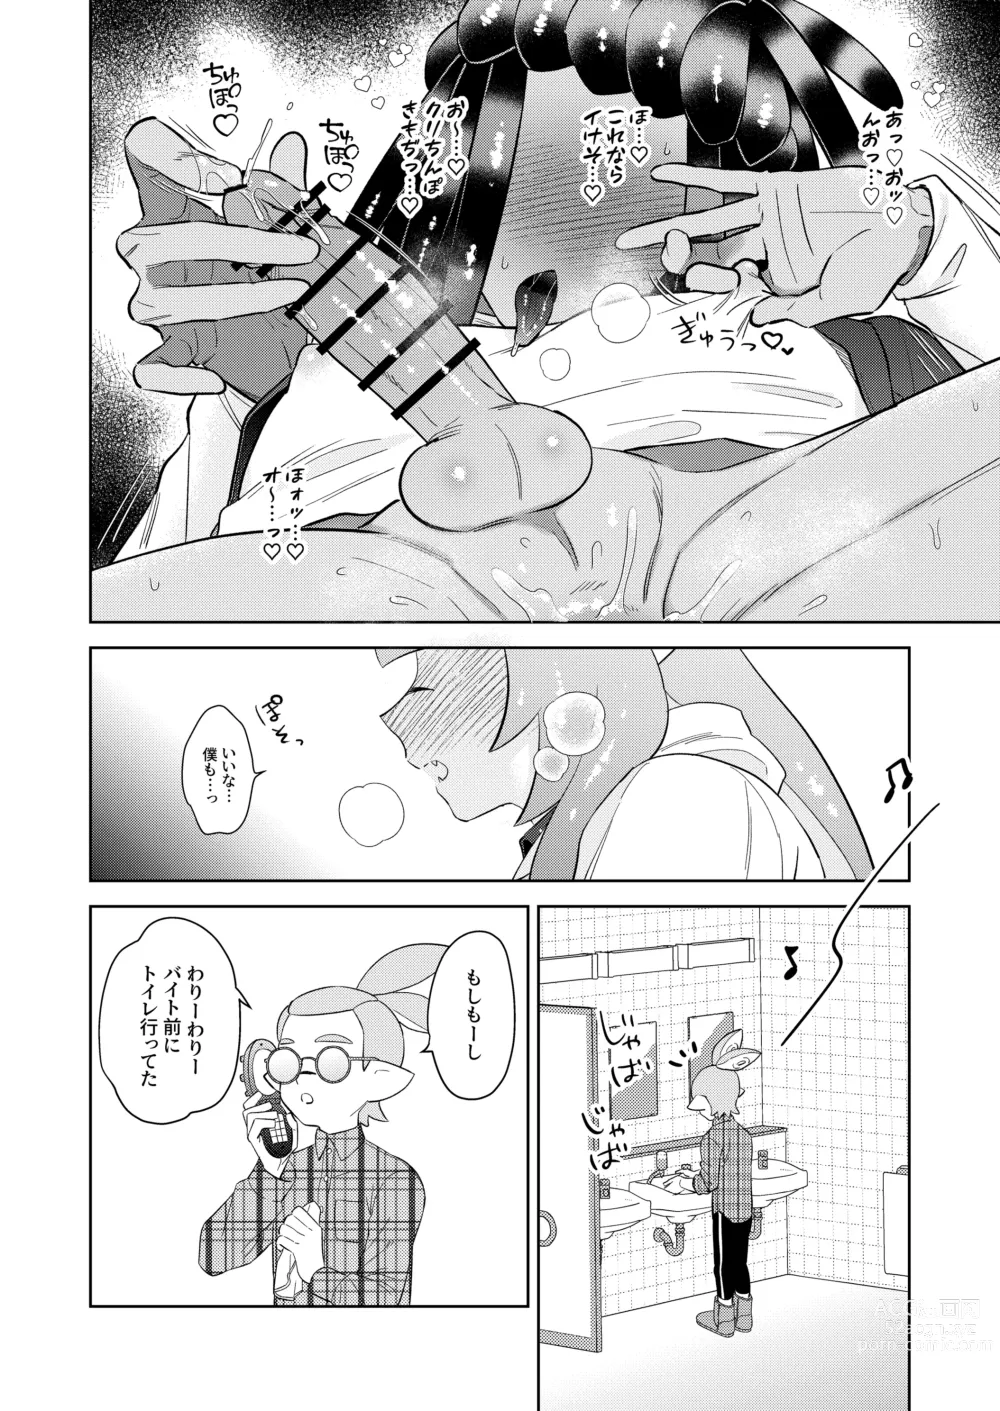 Page 25 of doujinshi Lovepotion Chocolate